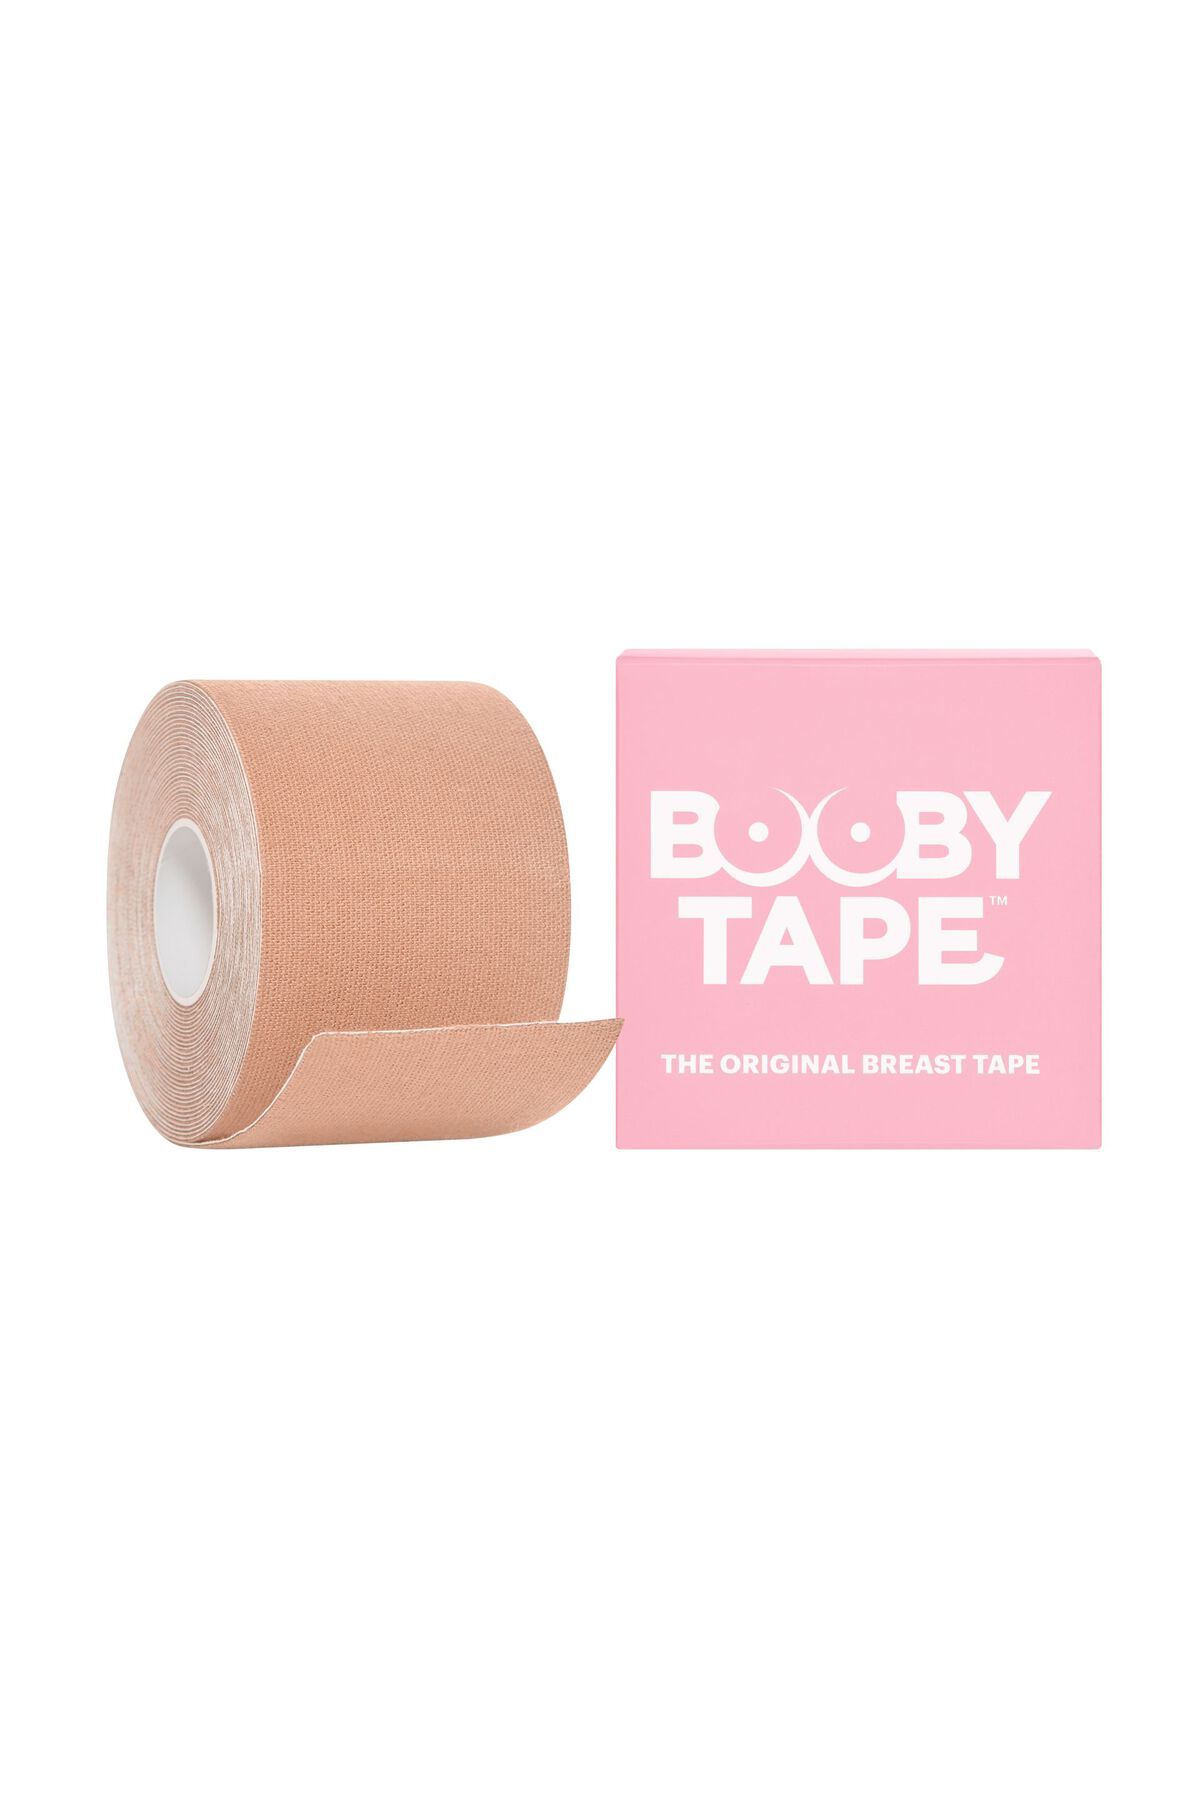 Boob Tape Waterproof Sticky Boobtape Boob Tape for Large Breast Lift Plus  Size from A to E Cup II - Buy Boob Tape Waterproof Sticky Boobtape Boob Tape  for Large Breast Lift